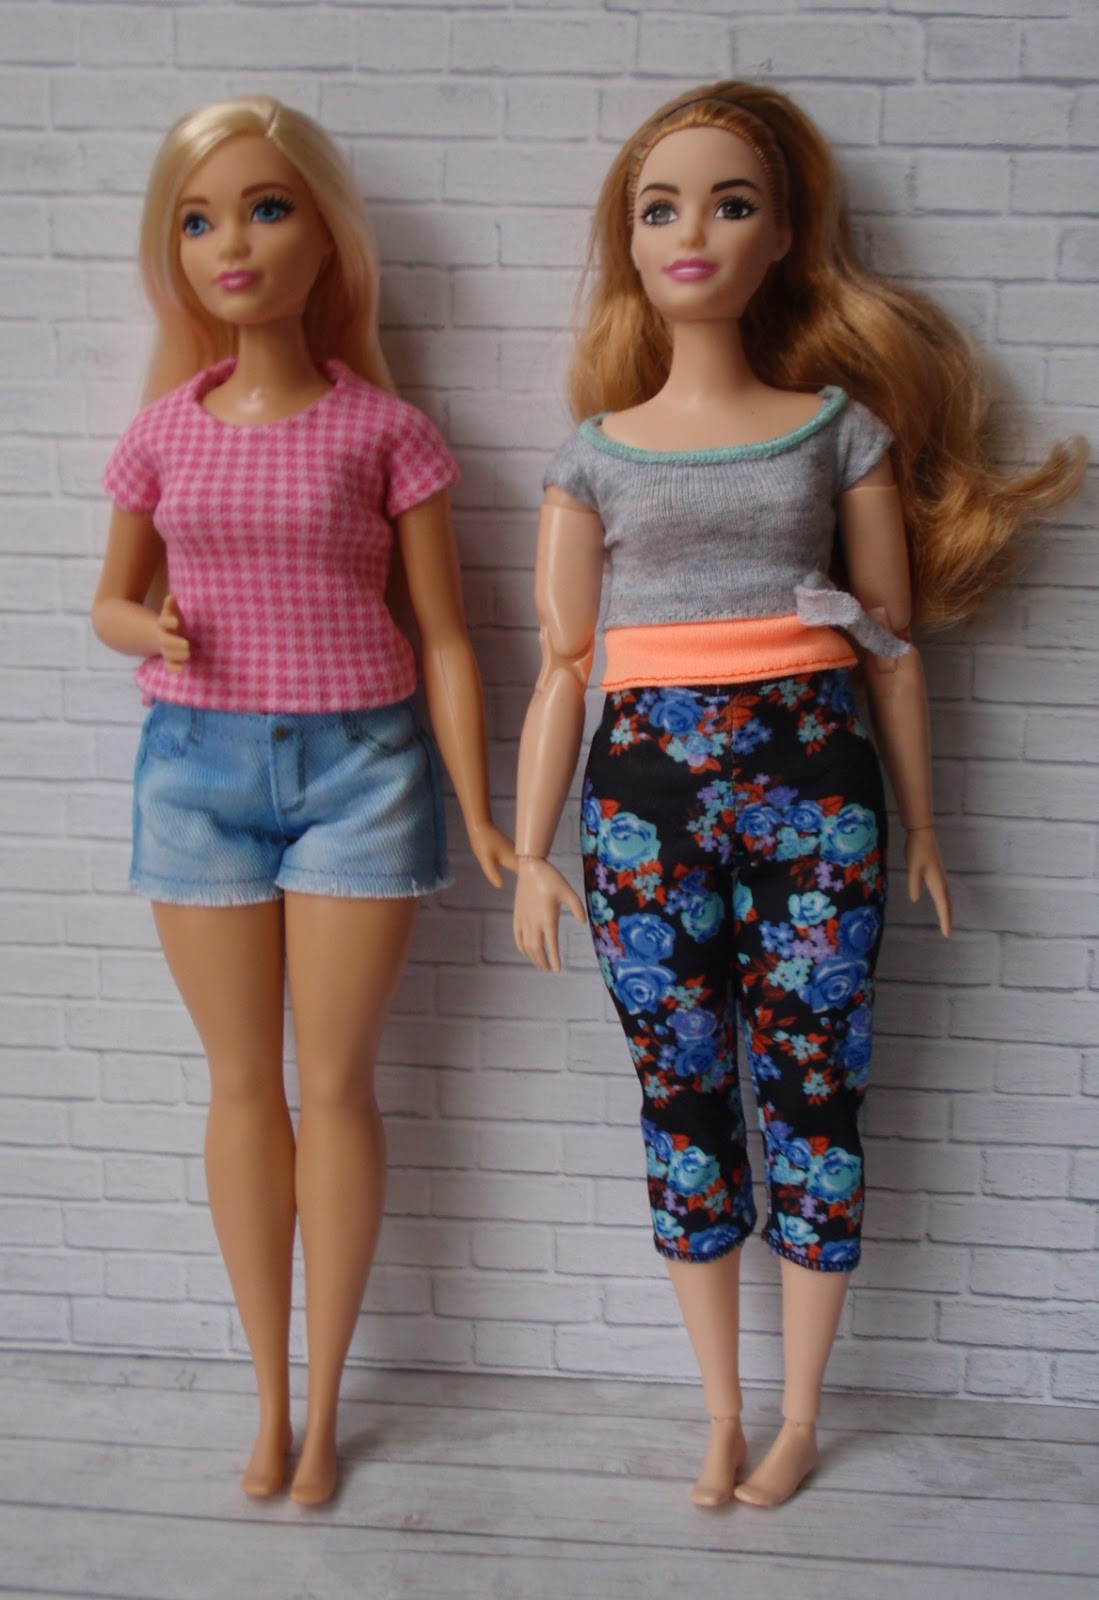 Little girls' reactions to curvy Barbie prove why we need curvy Barbie.